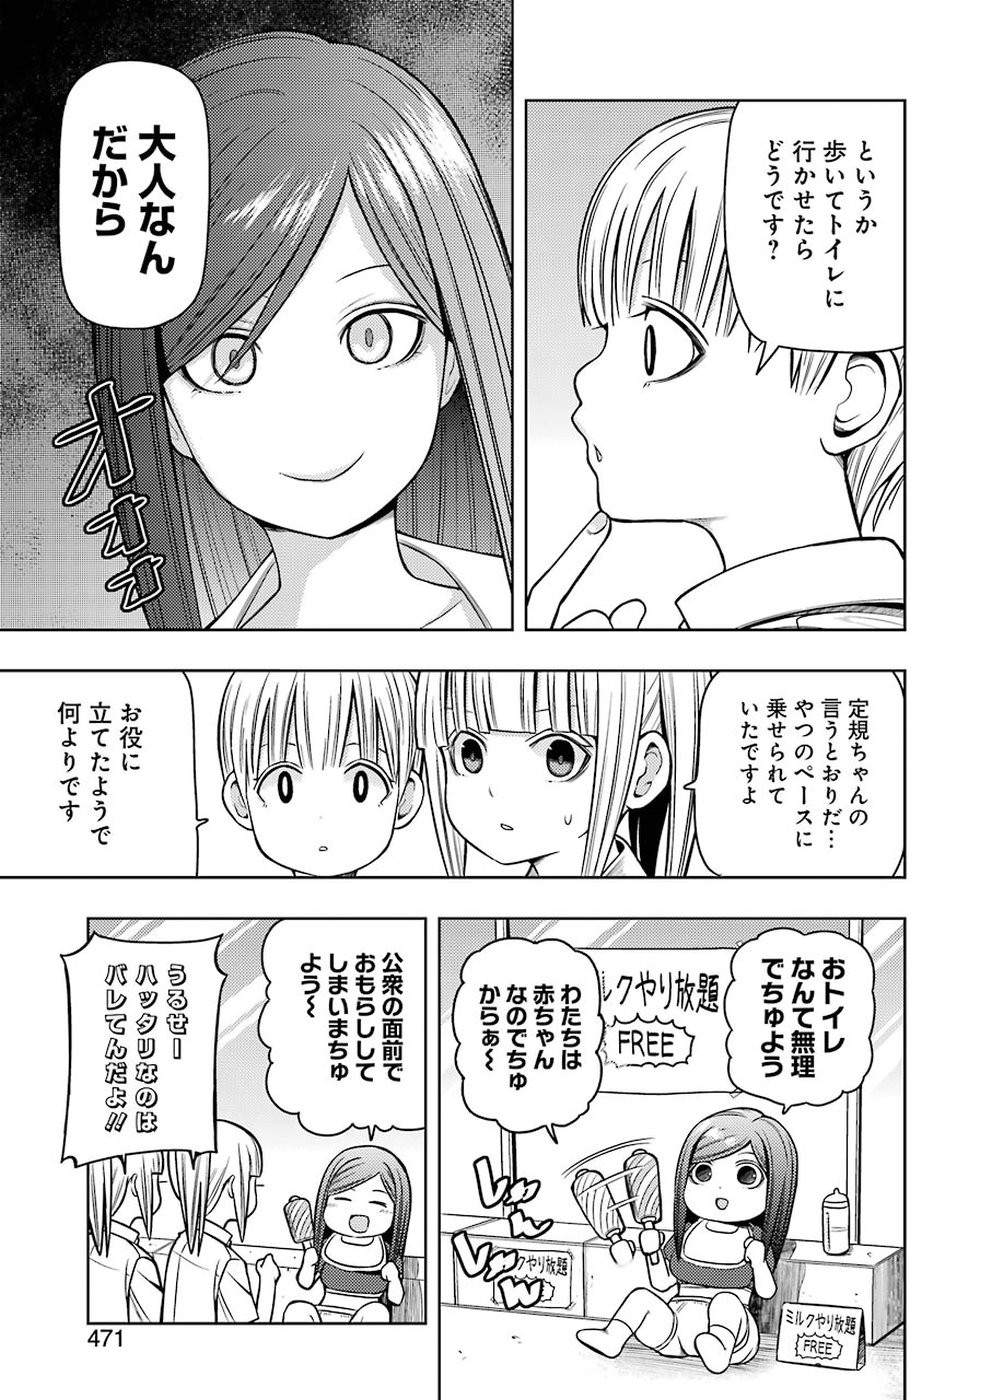 + Tic Nee-san - Chapter 187 - Page 3